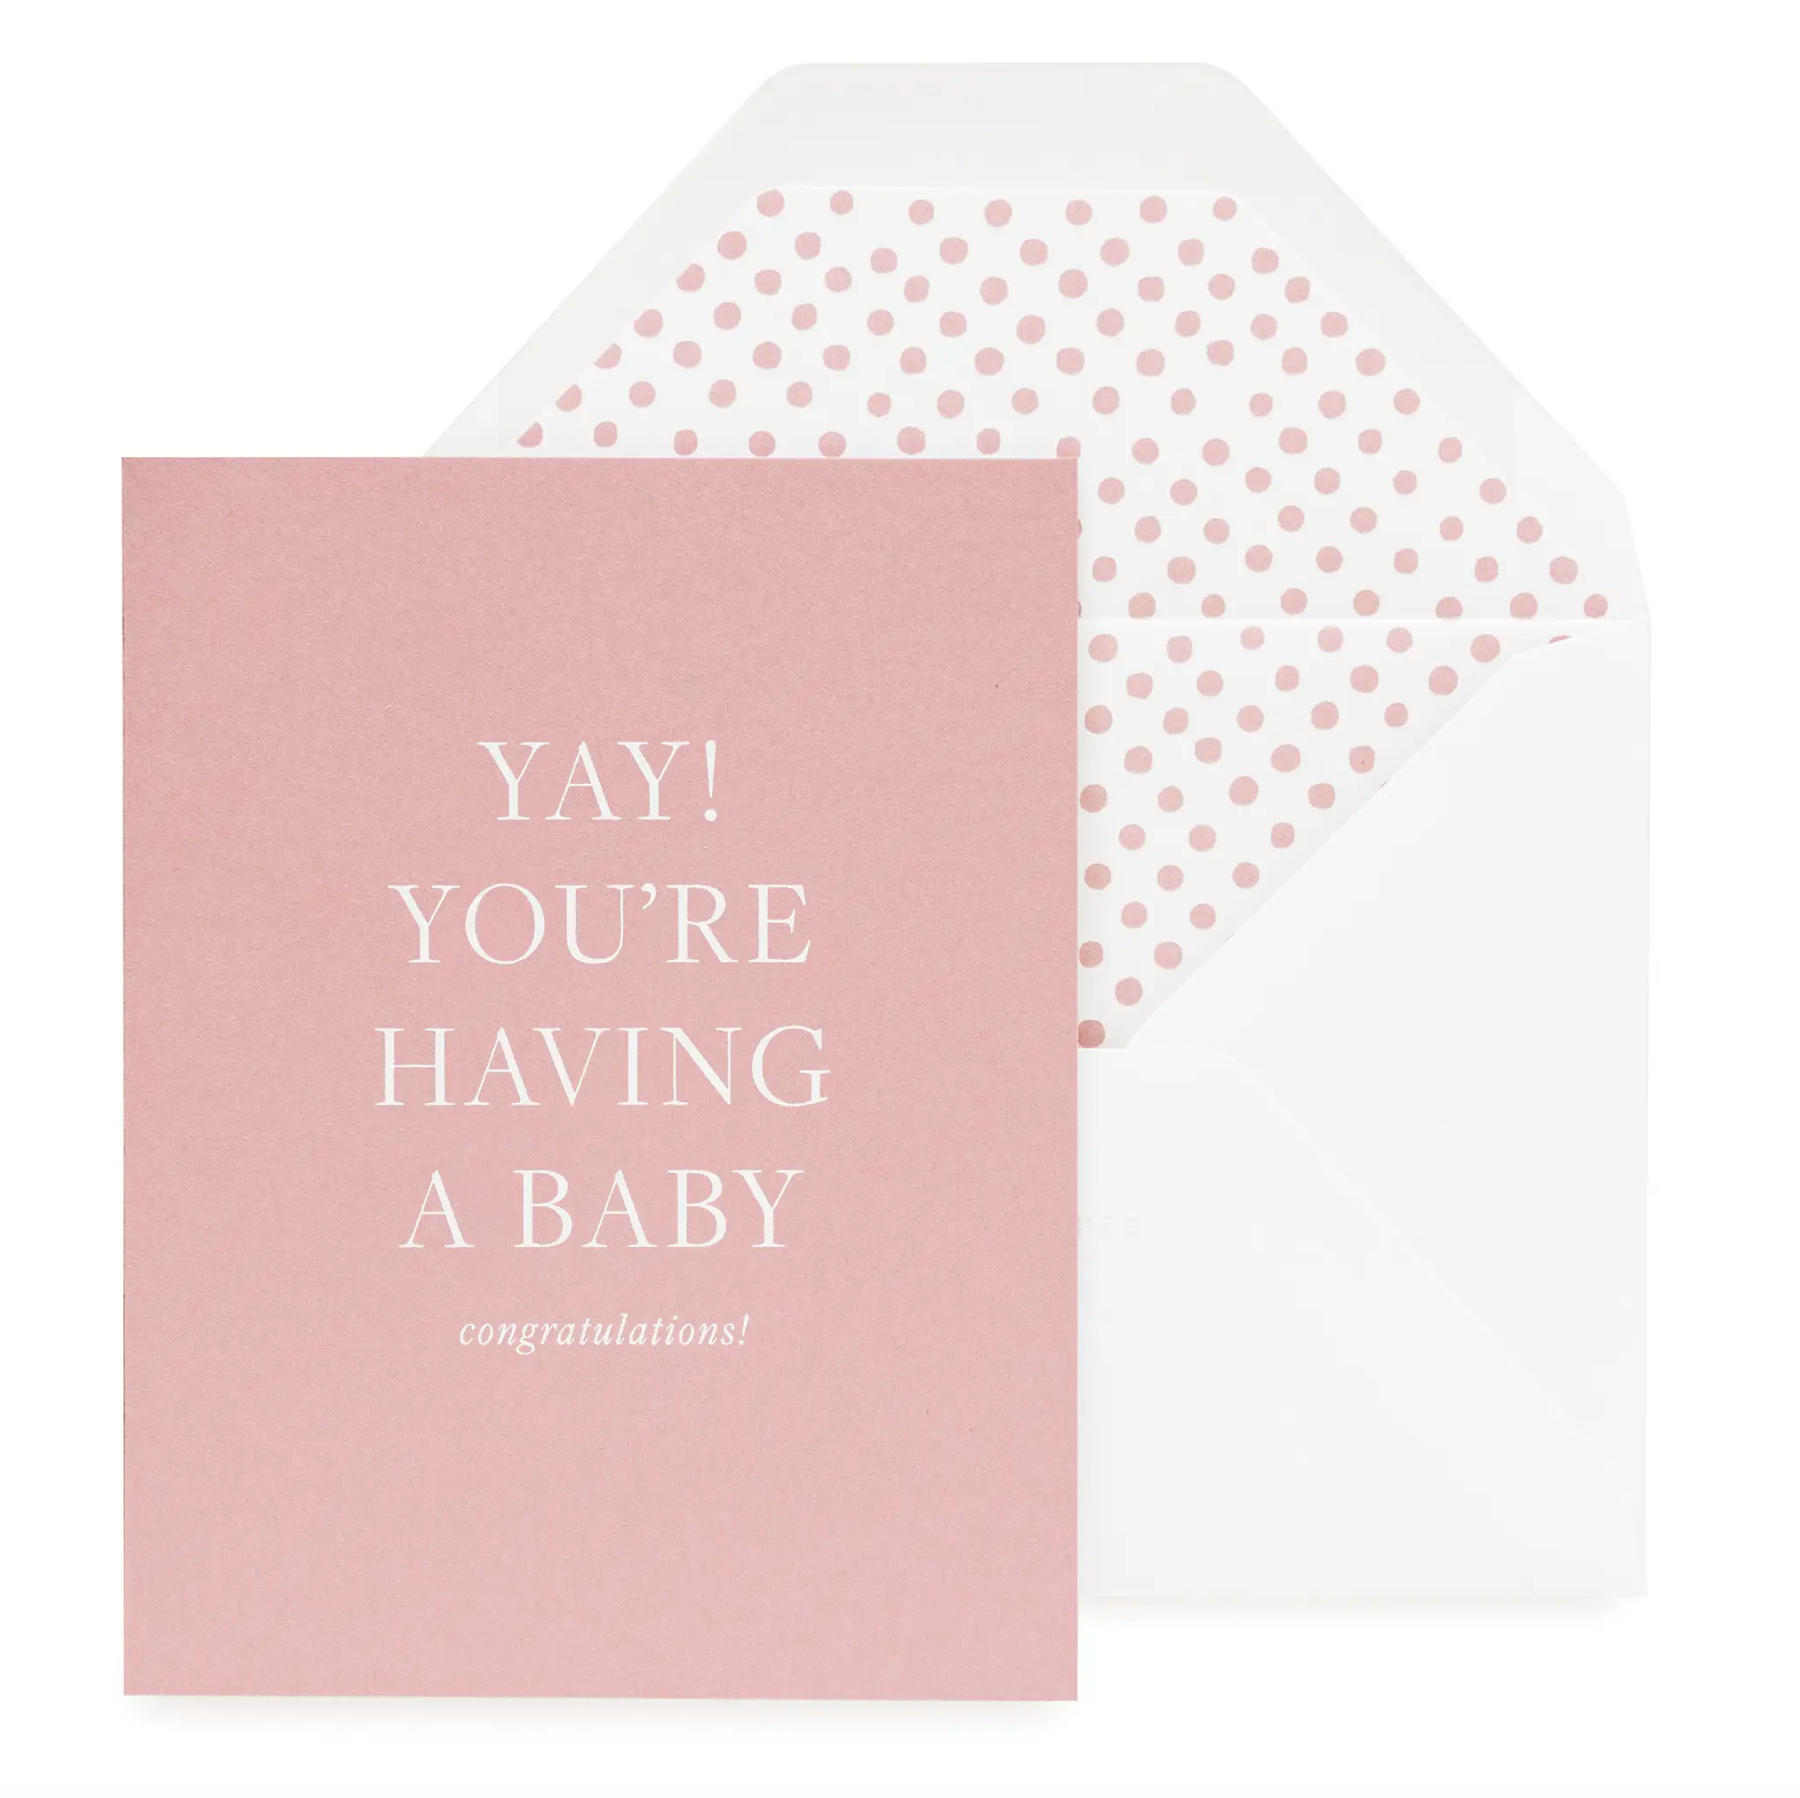 Yay! You're Having a Baby Card